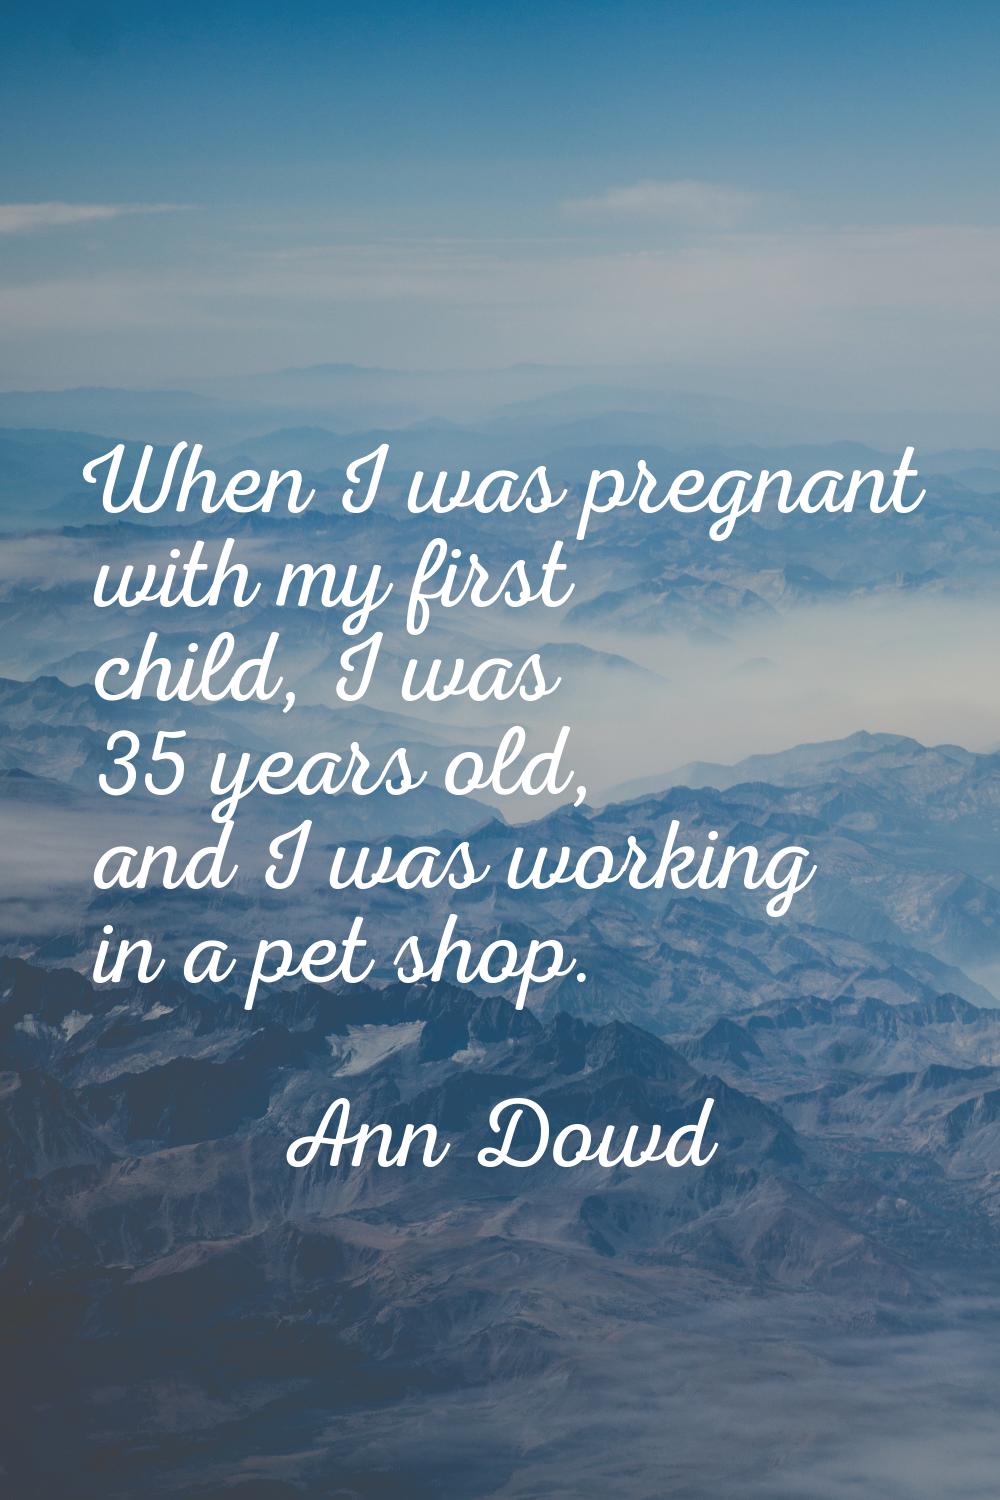 When I was pregnant with my first child, I was 35 years old, and I was working in a pet shop.